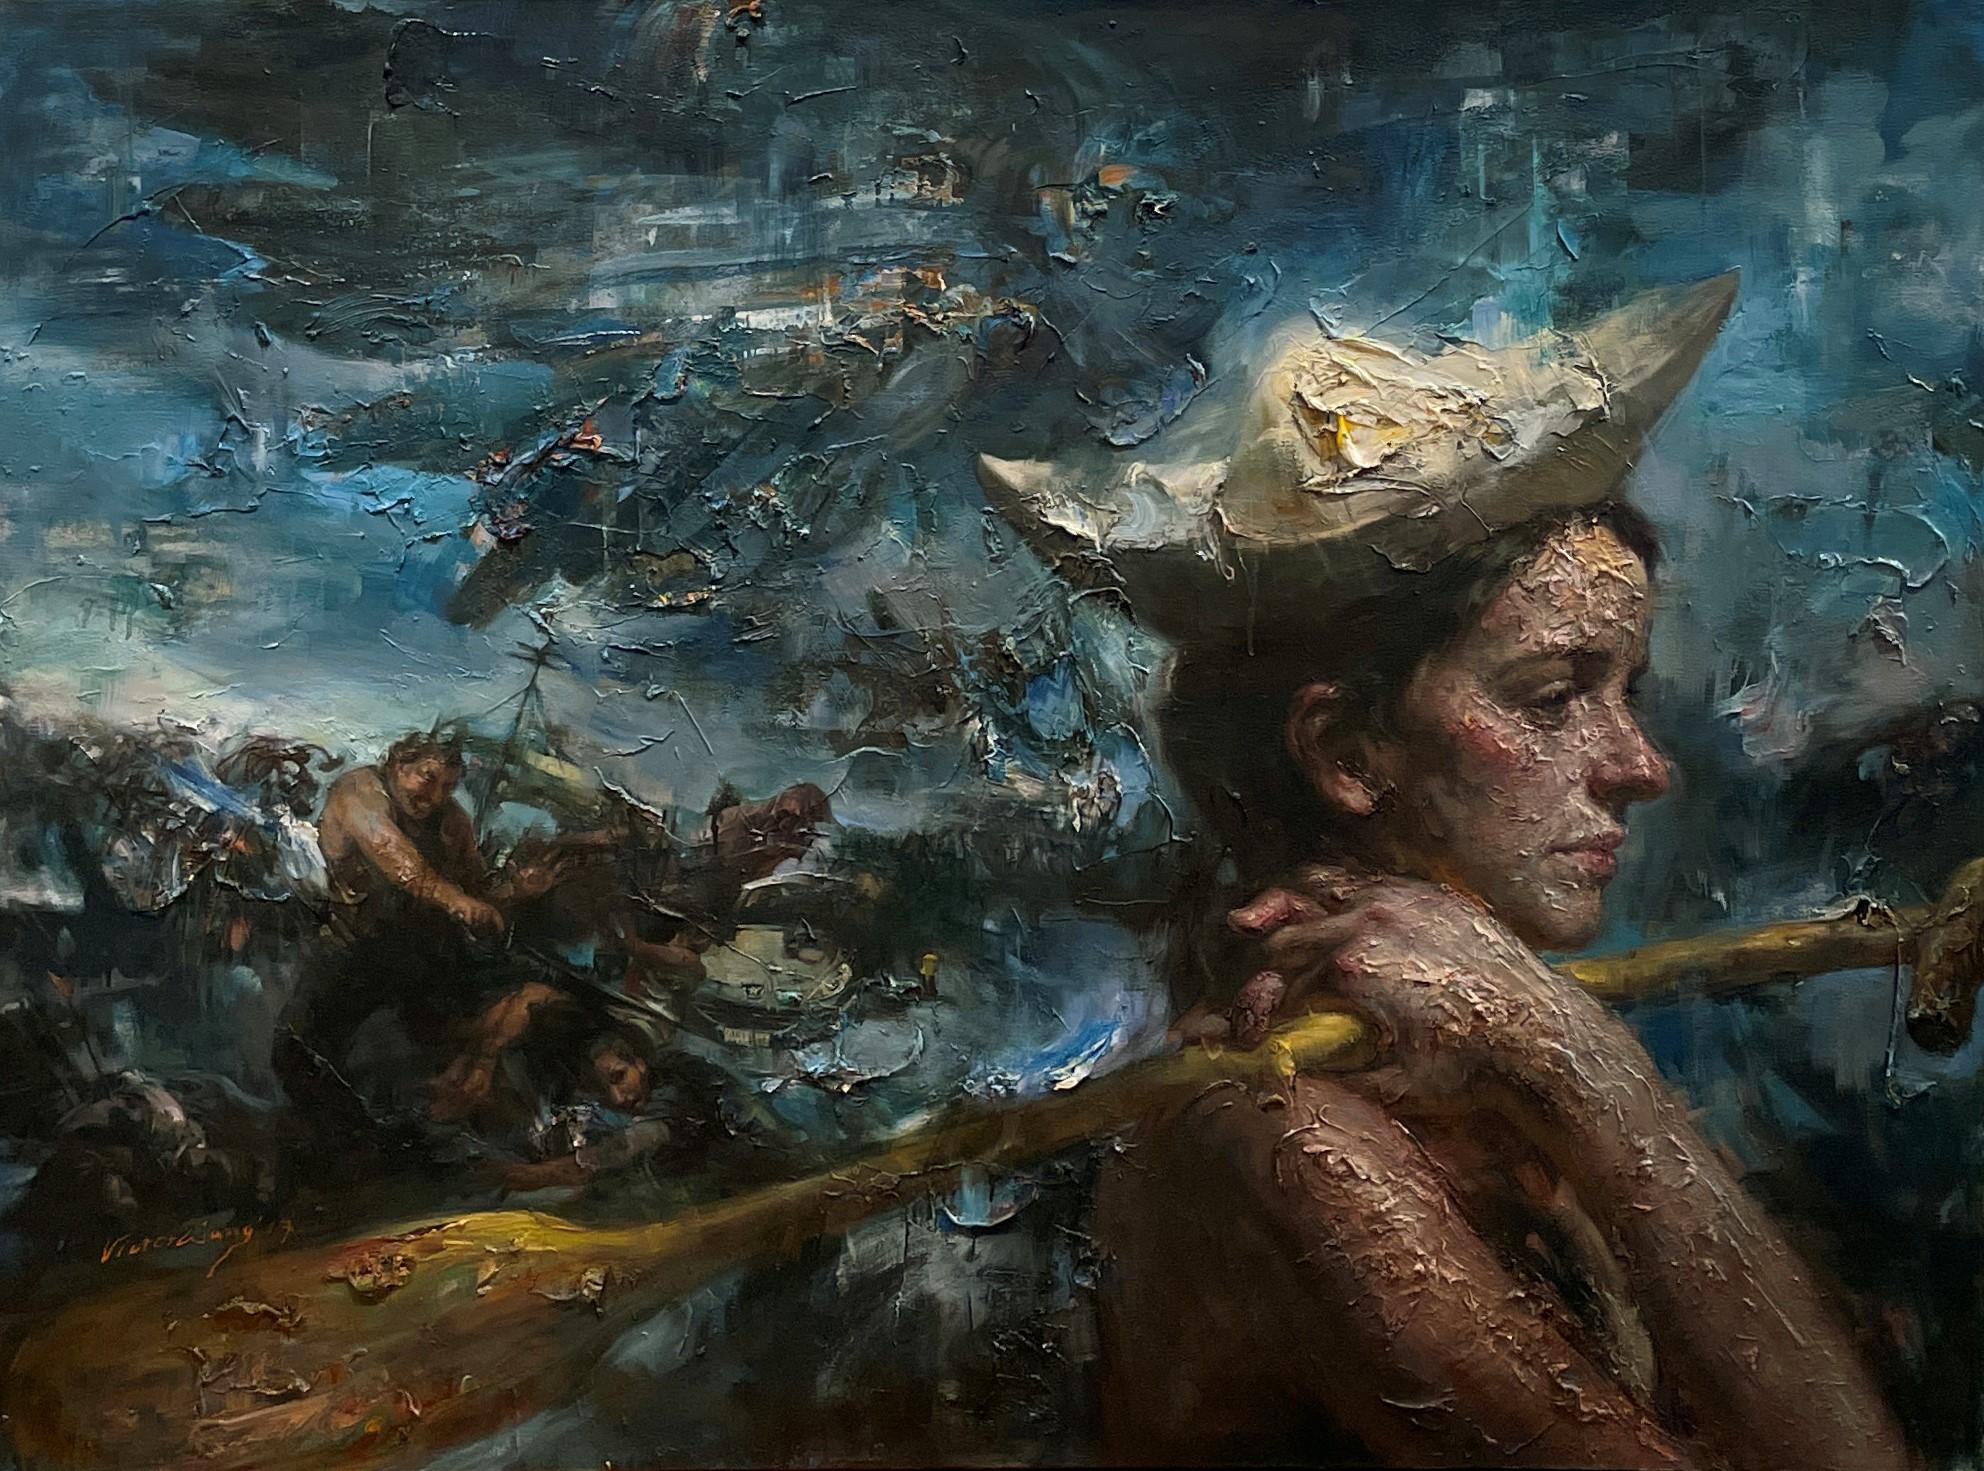 Victor Wang Portrait Painting - Dreaming Away - Highly Textured Dream-like Painting with Surreal Nautical Theme